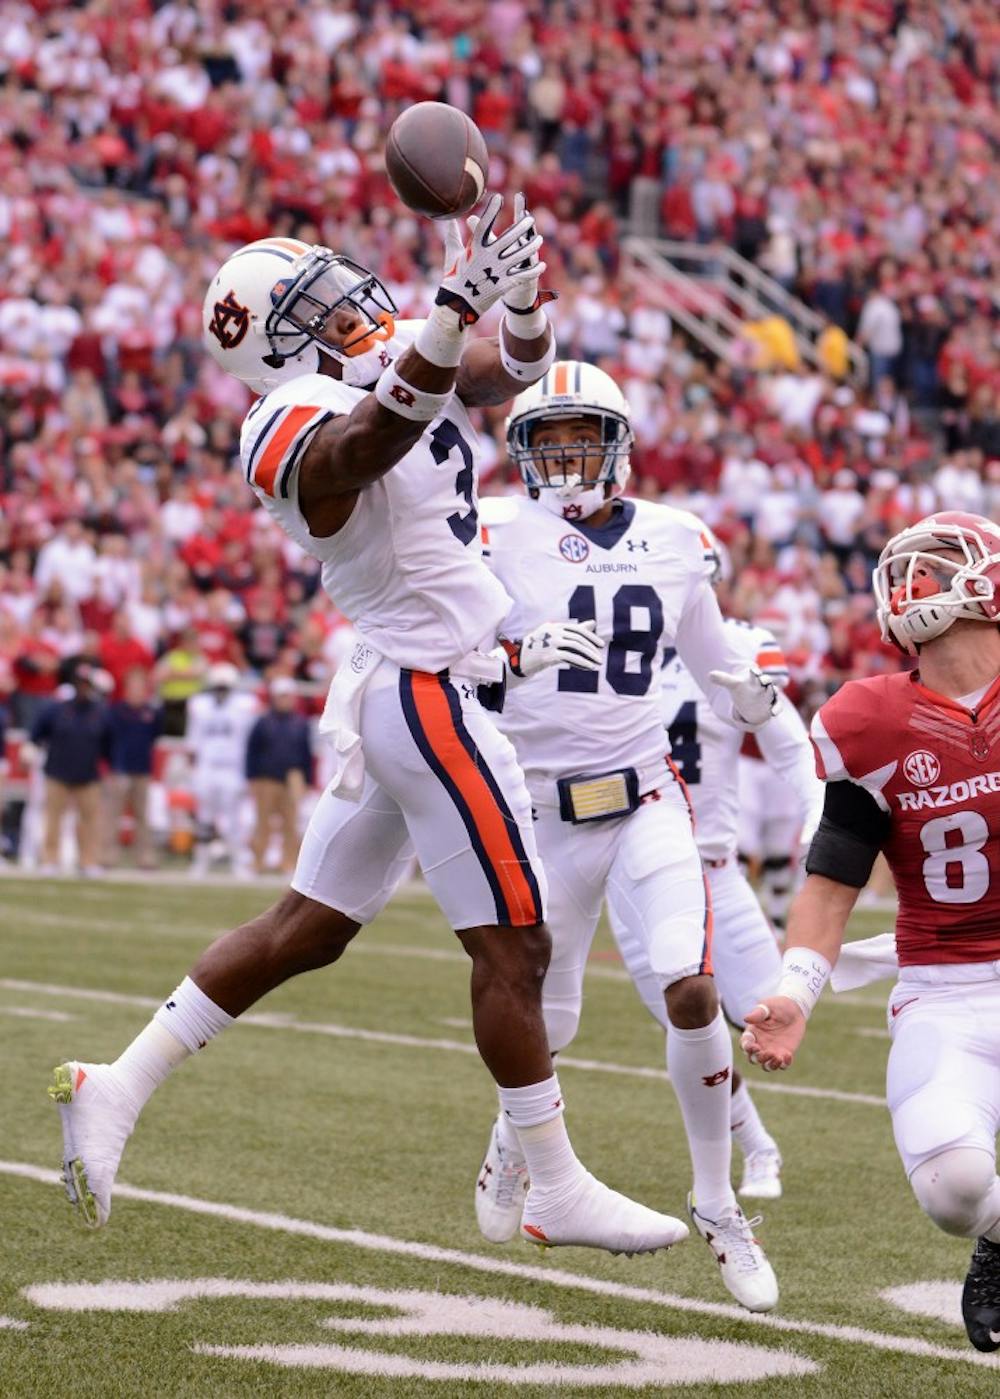 <p>Jonathan Jones (3) can't quite haul in a would-be interception in the first half.Auburn vs Arkansas on Saturday, October 24, 2015 in Fayetteville, AR.</p>